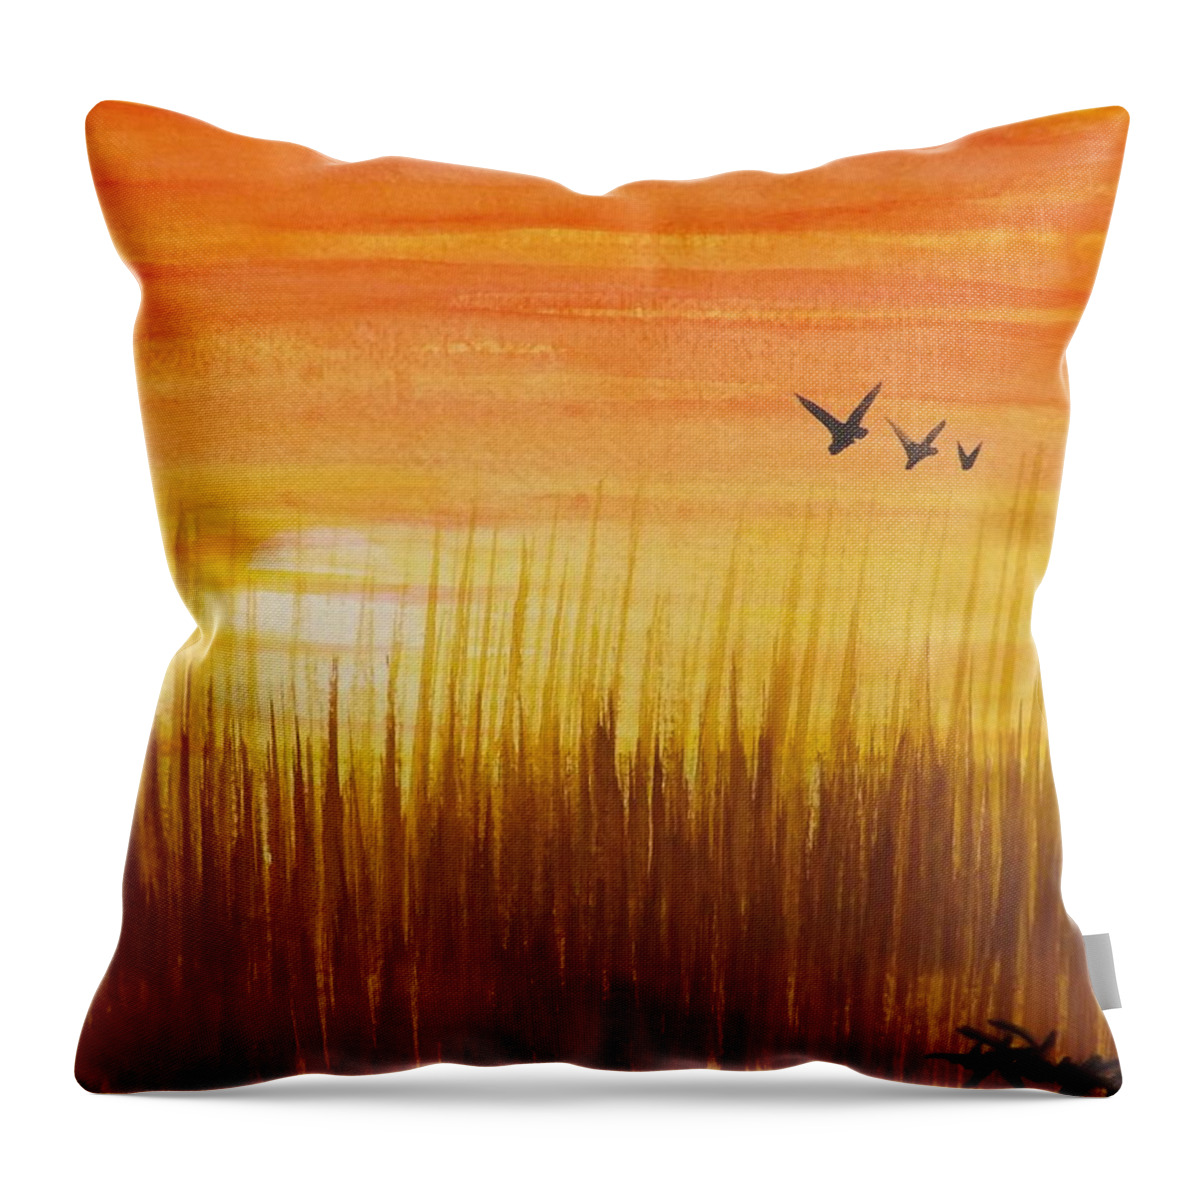 Wheatfield At Sunset Throw Pillow featuring the painting Wheatfield at Sunset by Darren Robinson